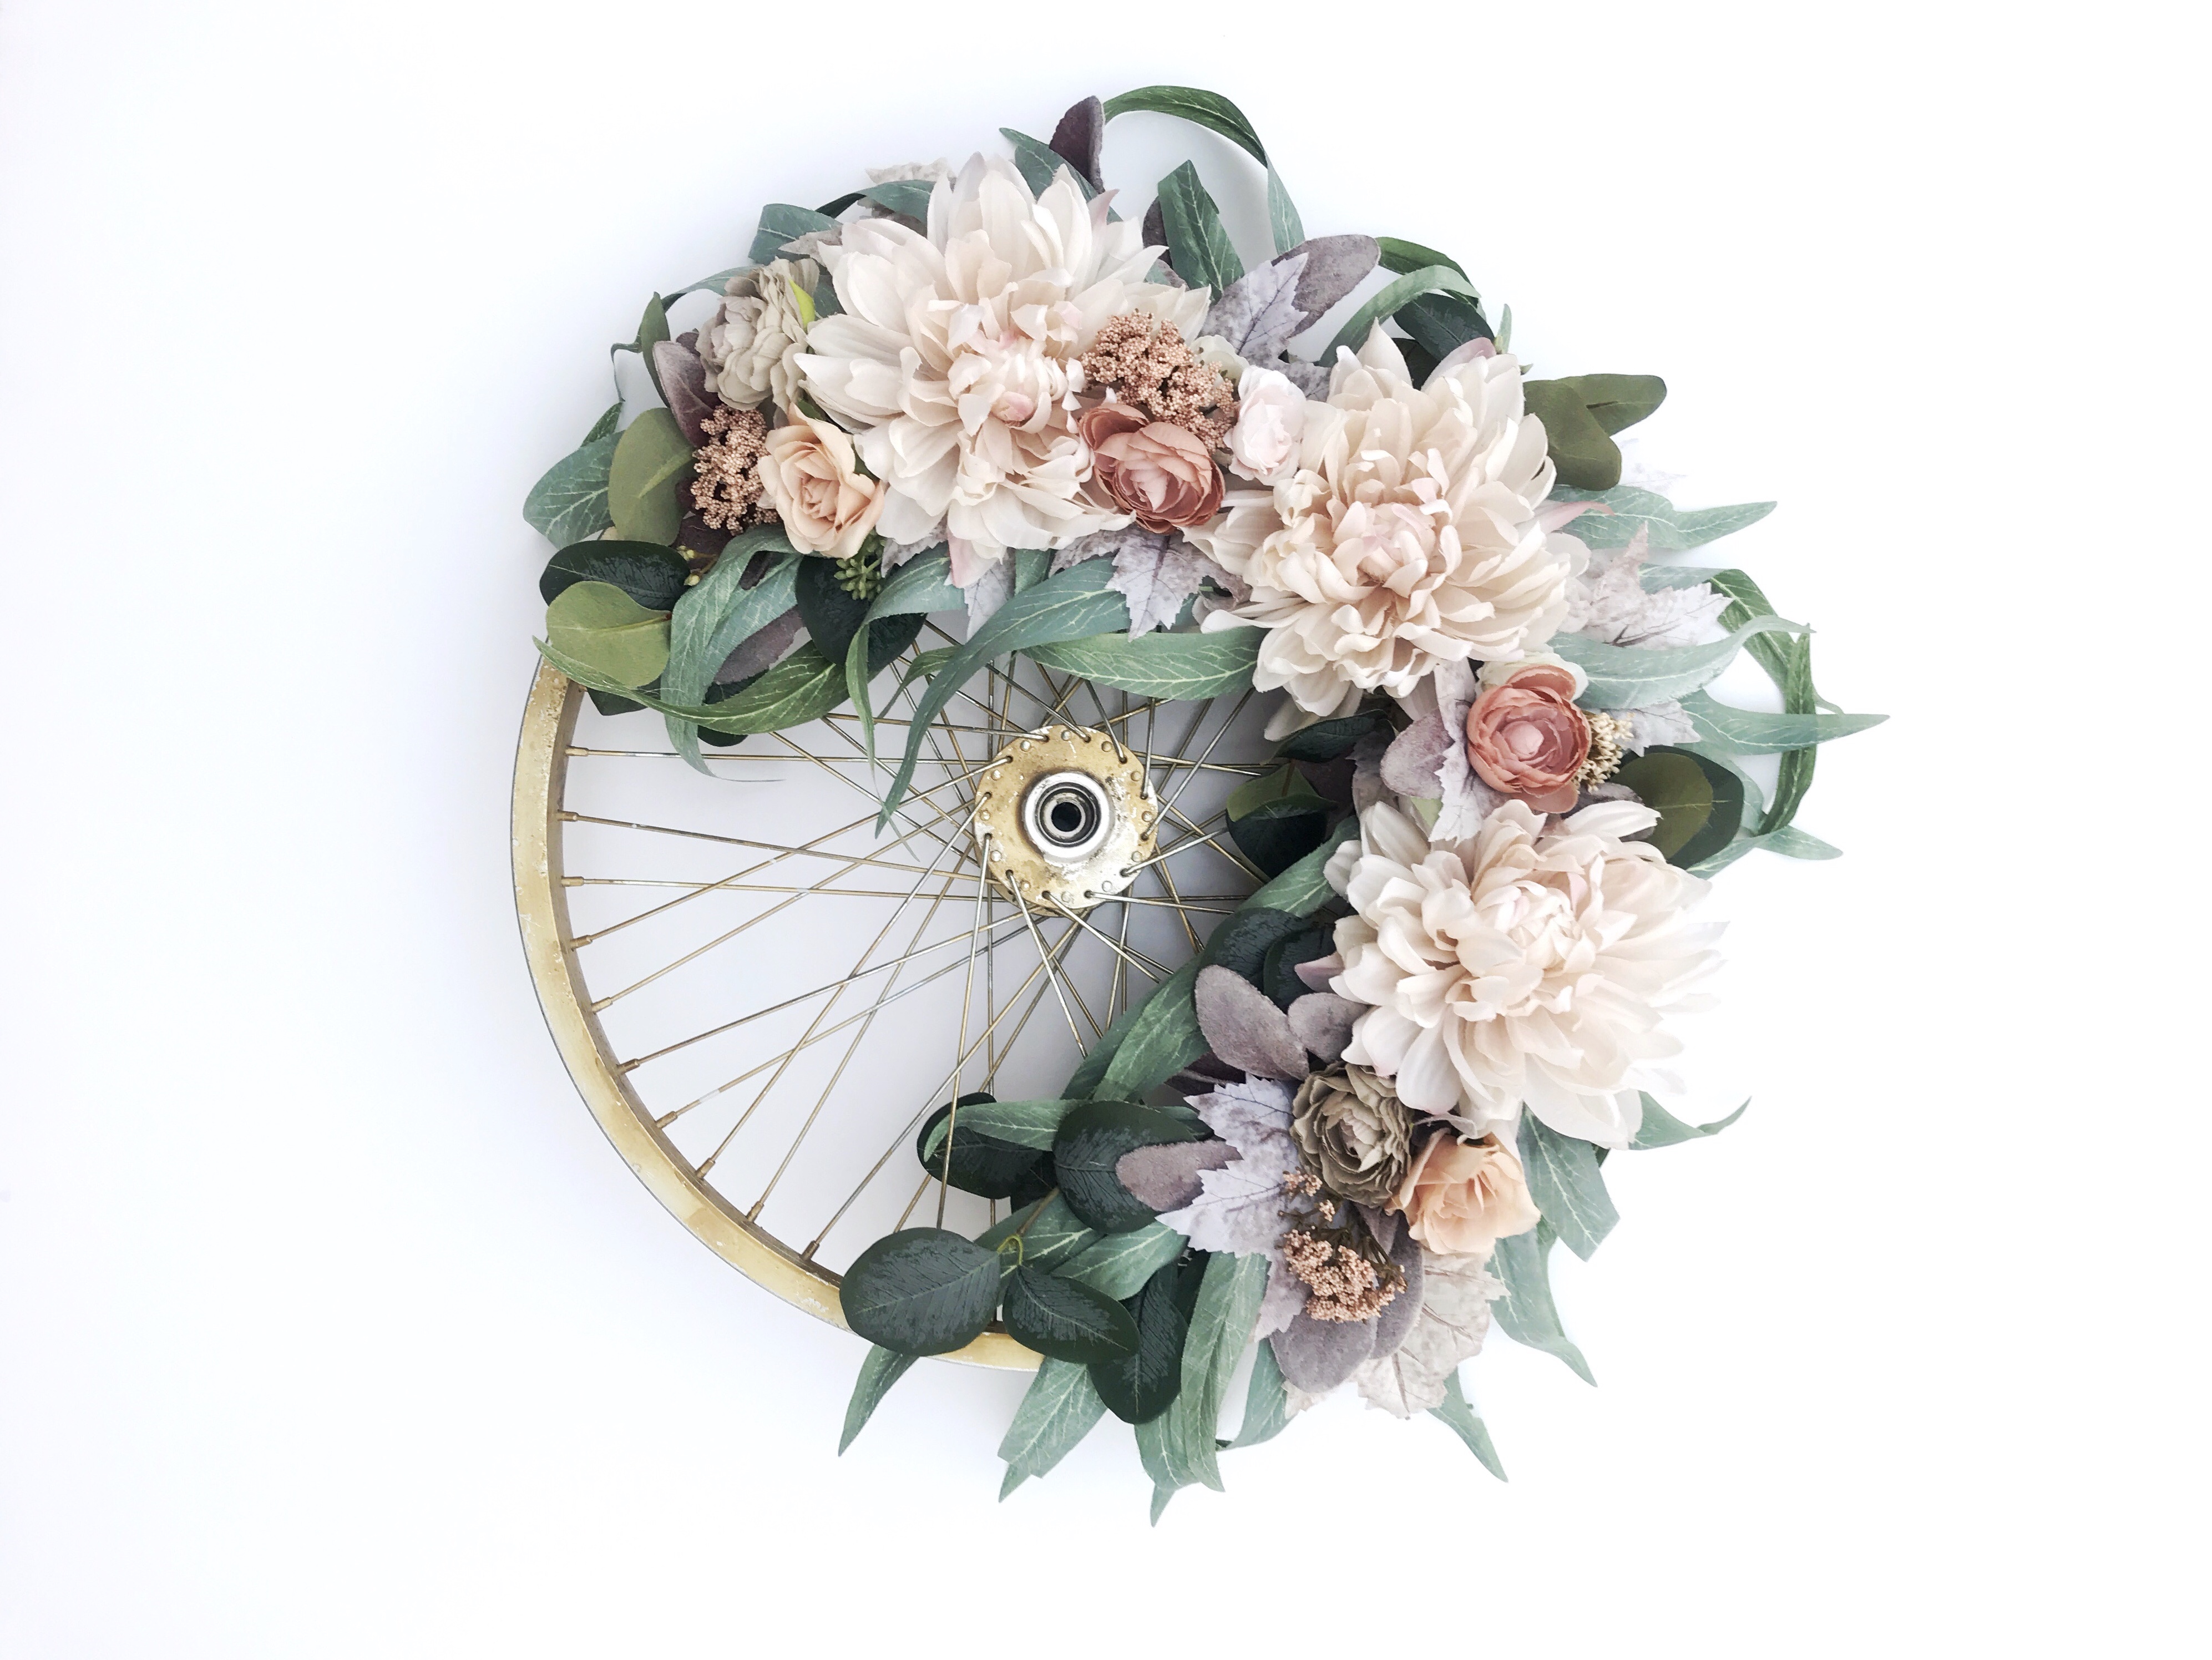 Round floral decorative bicycle wheel wreath with light pink flowers and greenery from Bloom Valley Market.